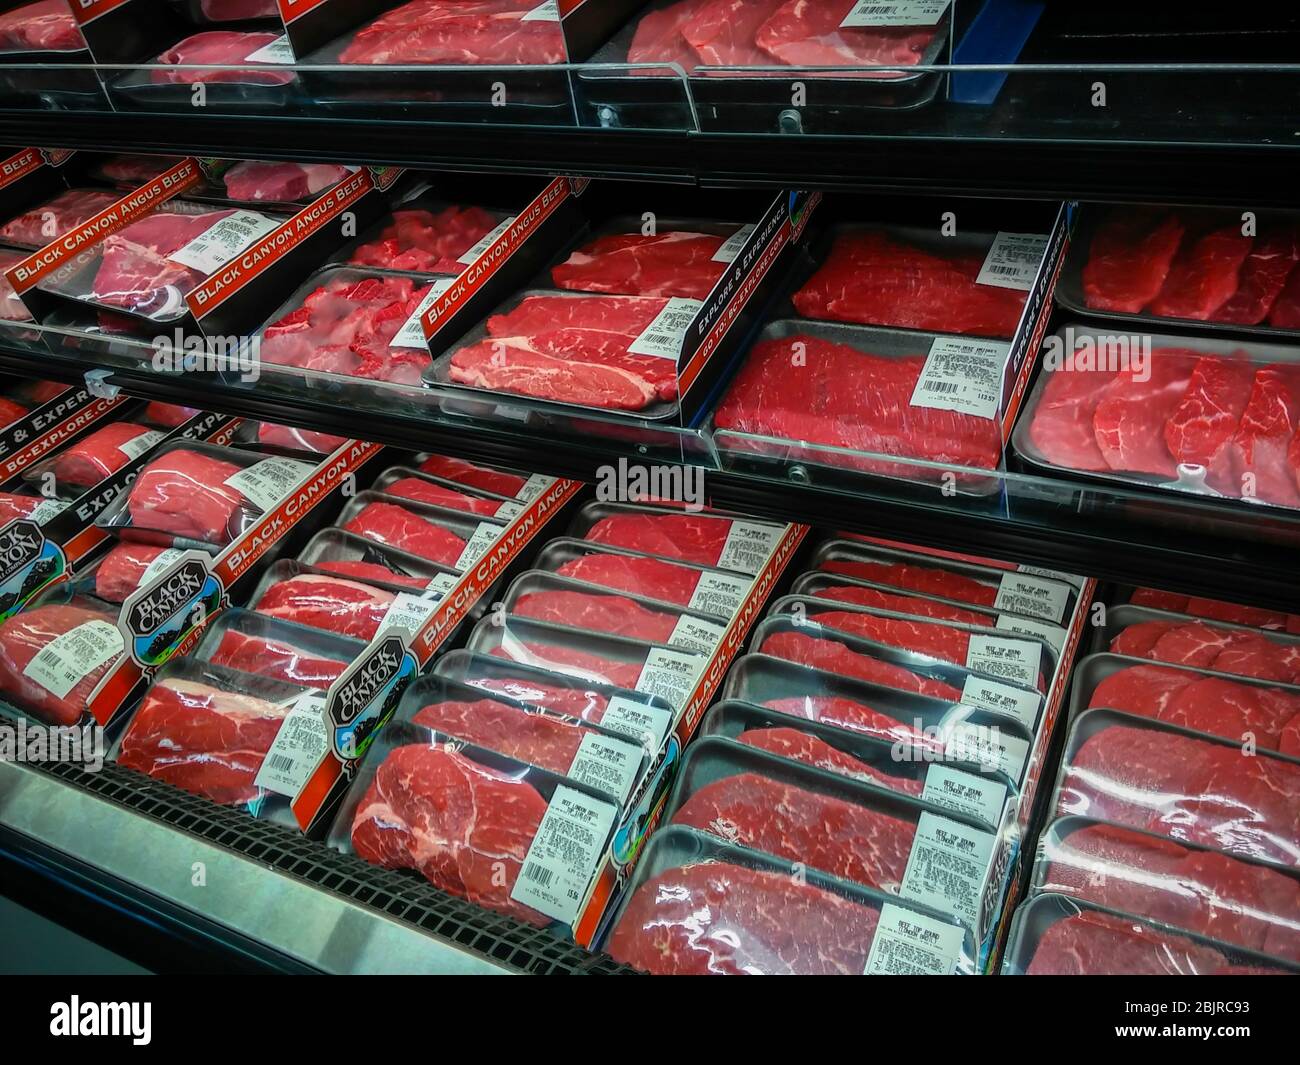 An attractive display of meat in the butcher department of a supermarket in New York on Thursday, April 23, 2020. Smithfield Foods’ CEO Kenneth Sullivan previously announced that the nation’s meat supply is “perilously close” to a shortage. (© Richard B. Levine) Stock Photo